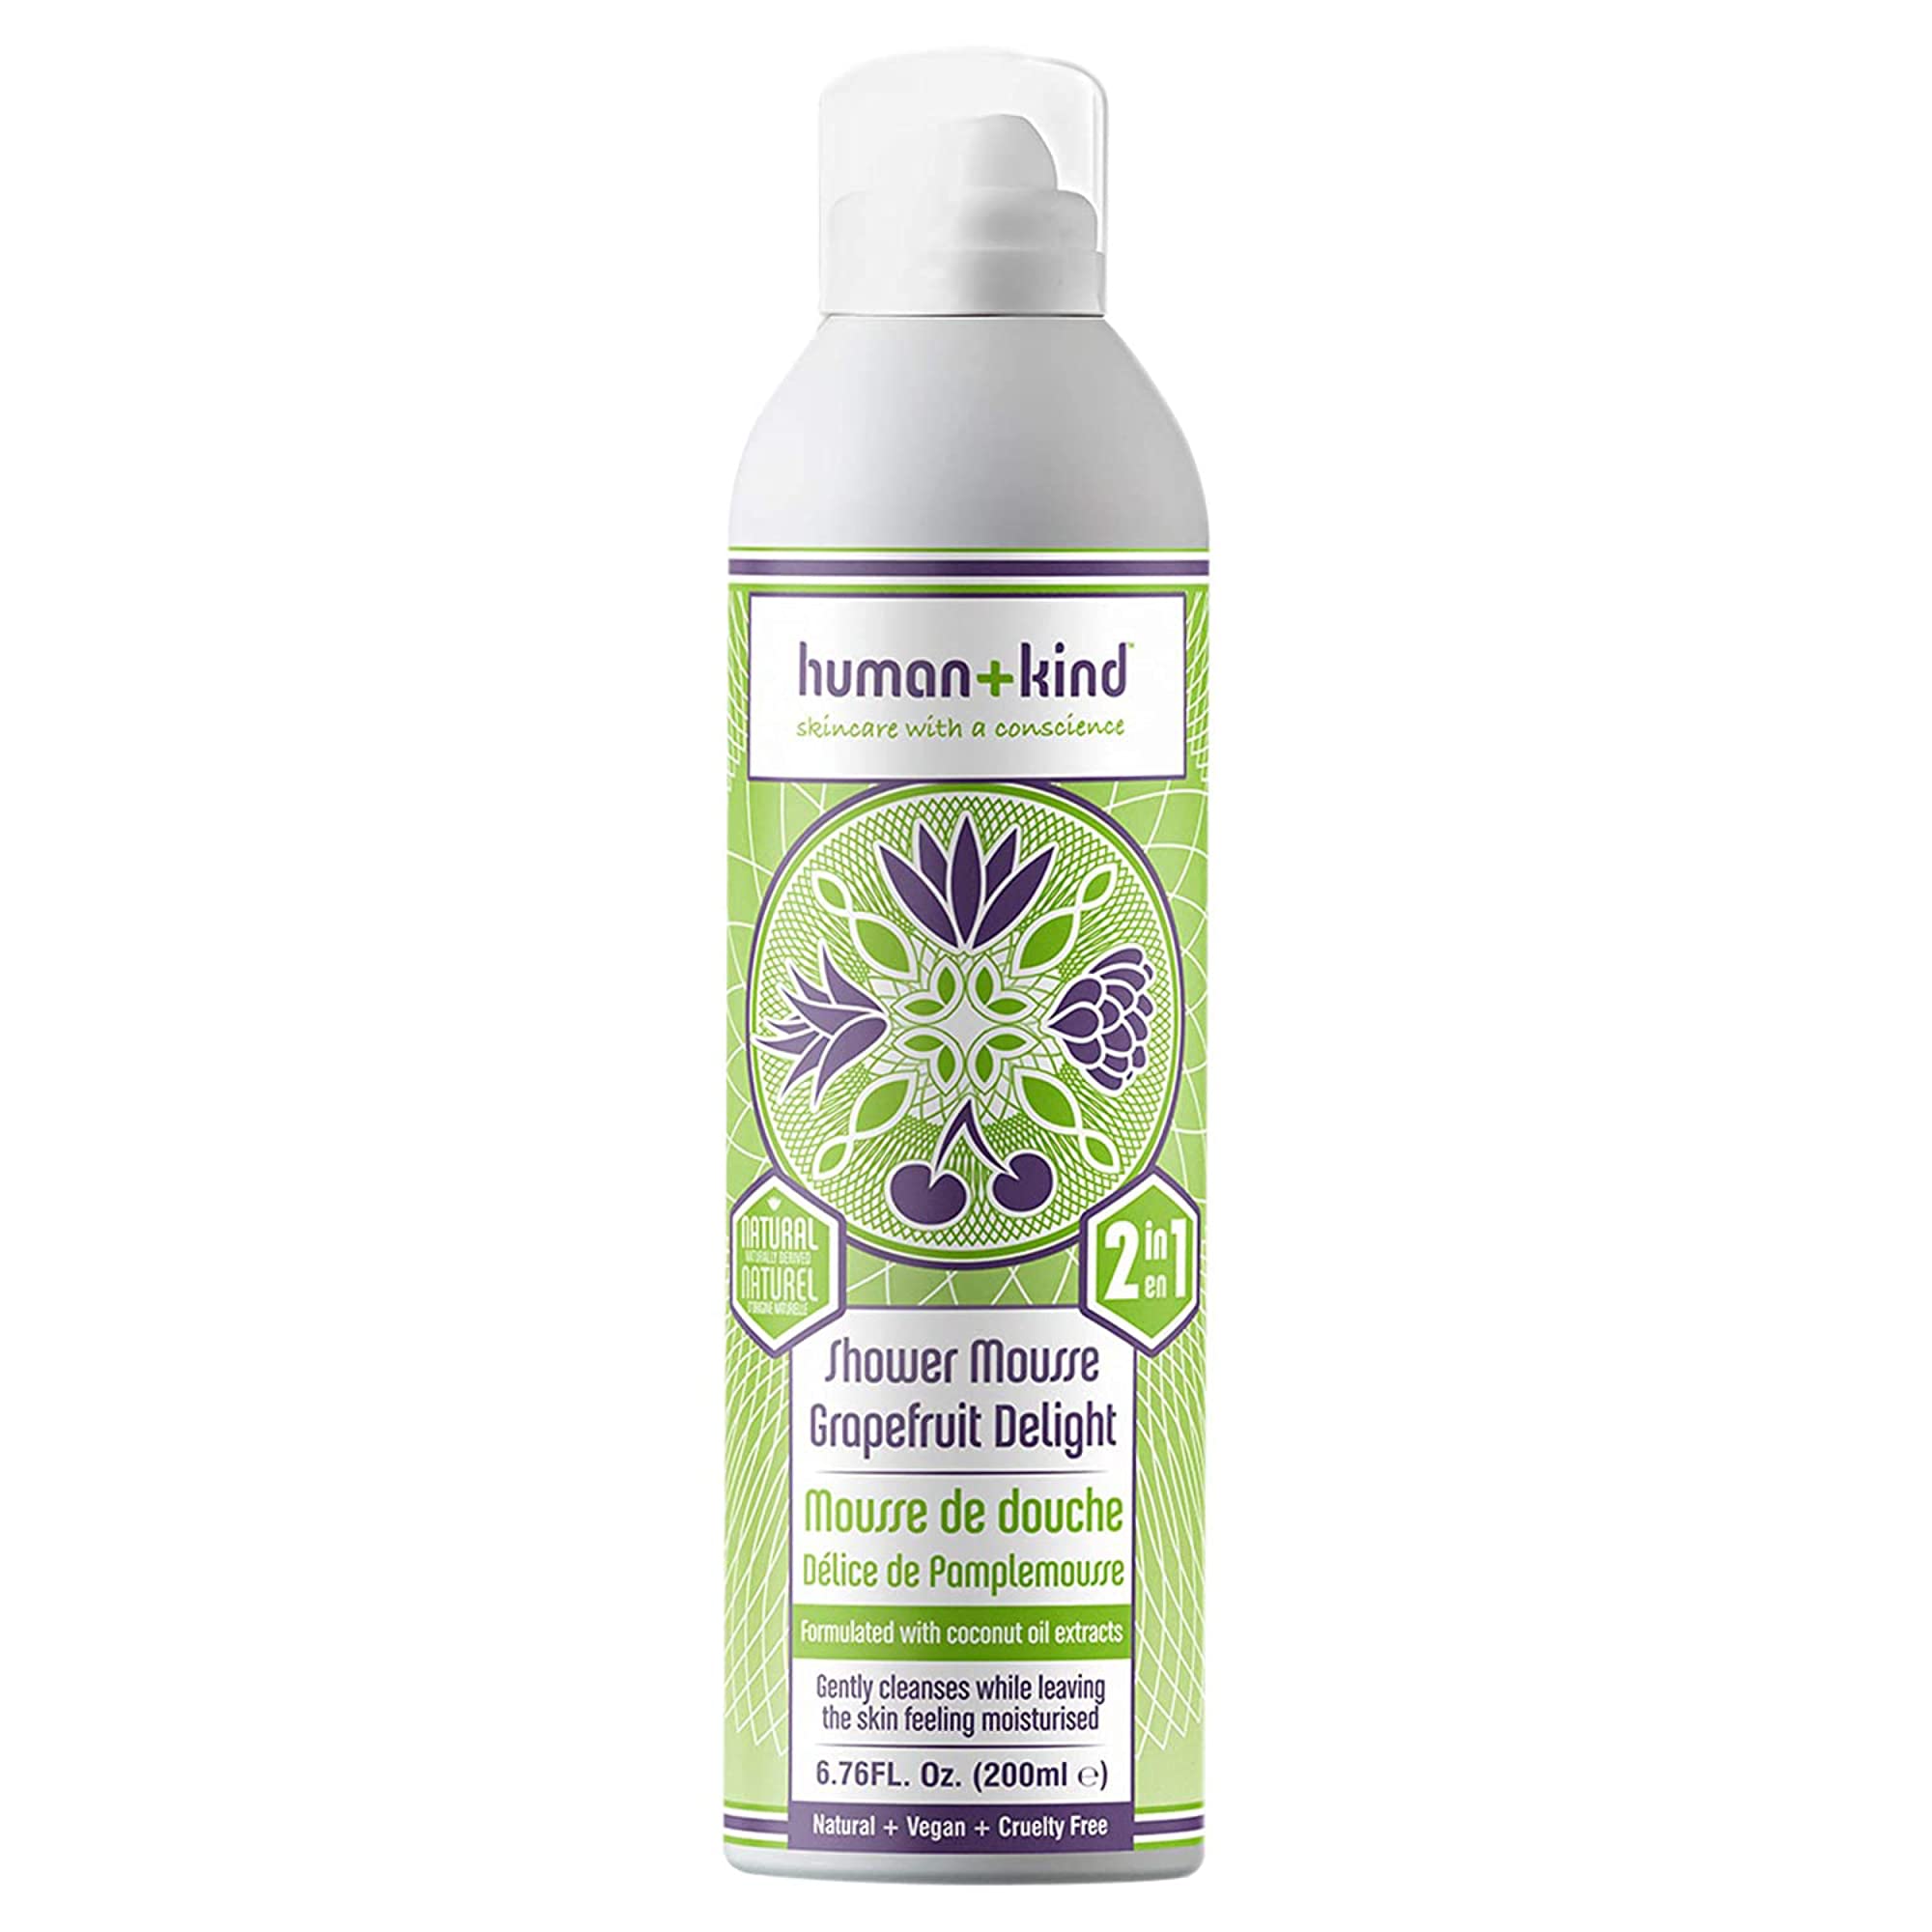 Human+Kind Shower Mousse Body Wash - Suitable For Sensitive Skin - Delicately Fragranced - Leaves Your Body Feeling Cleansed And Beautifully Soft - Nourishes Dry Skin - Grapefruit Delight - 6.76 Oz.